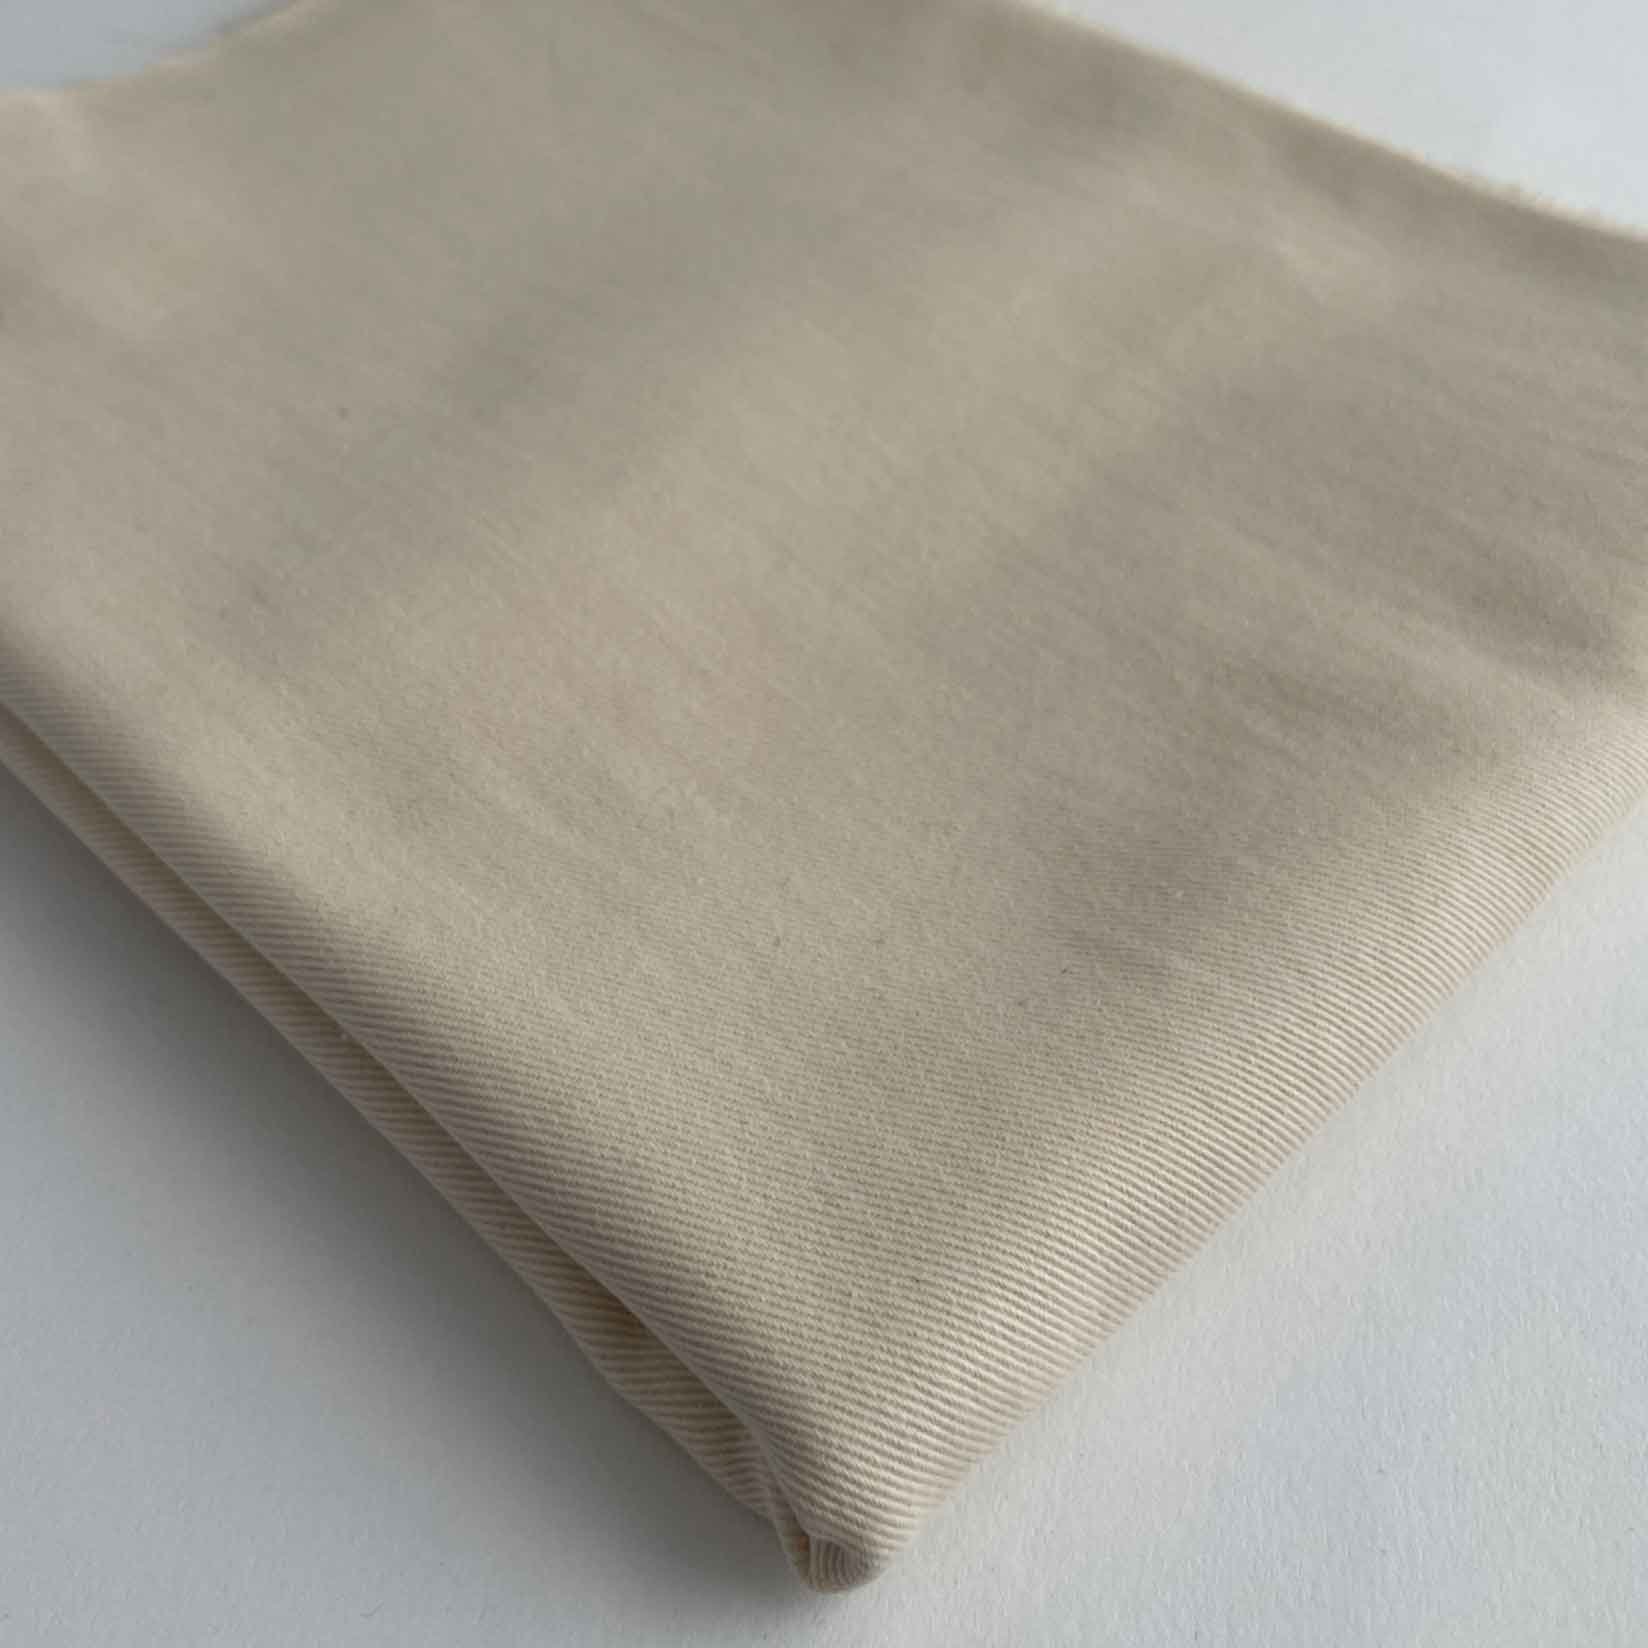 Natural rustic linen fabric, Fabric by the yard, Undyed rustic linen fabric,  Unwashed linen fabric, Natural linen fabric, Sewing fabric